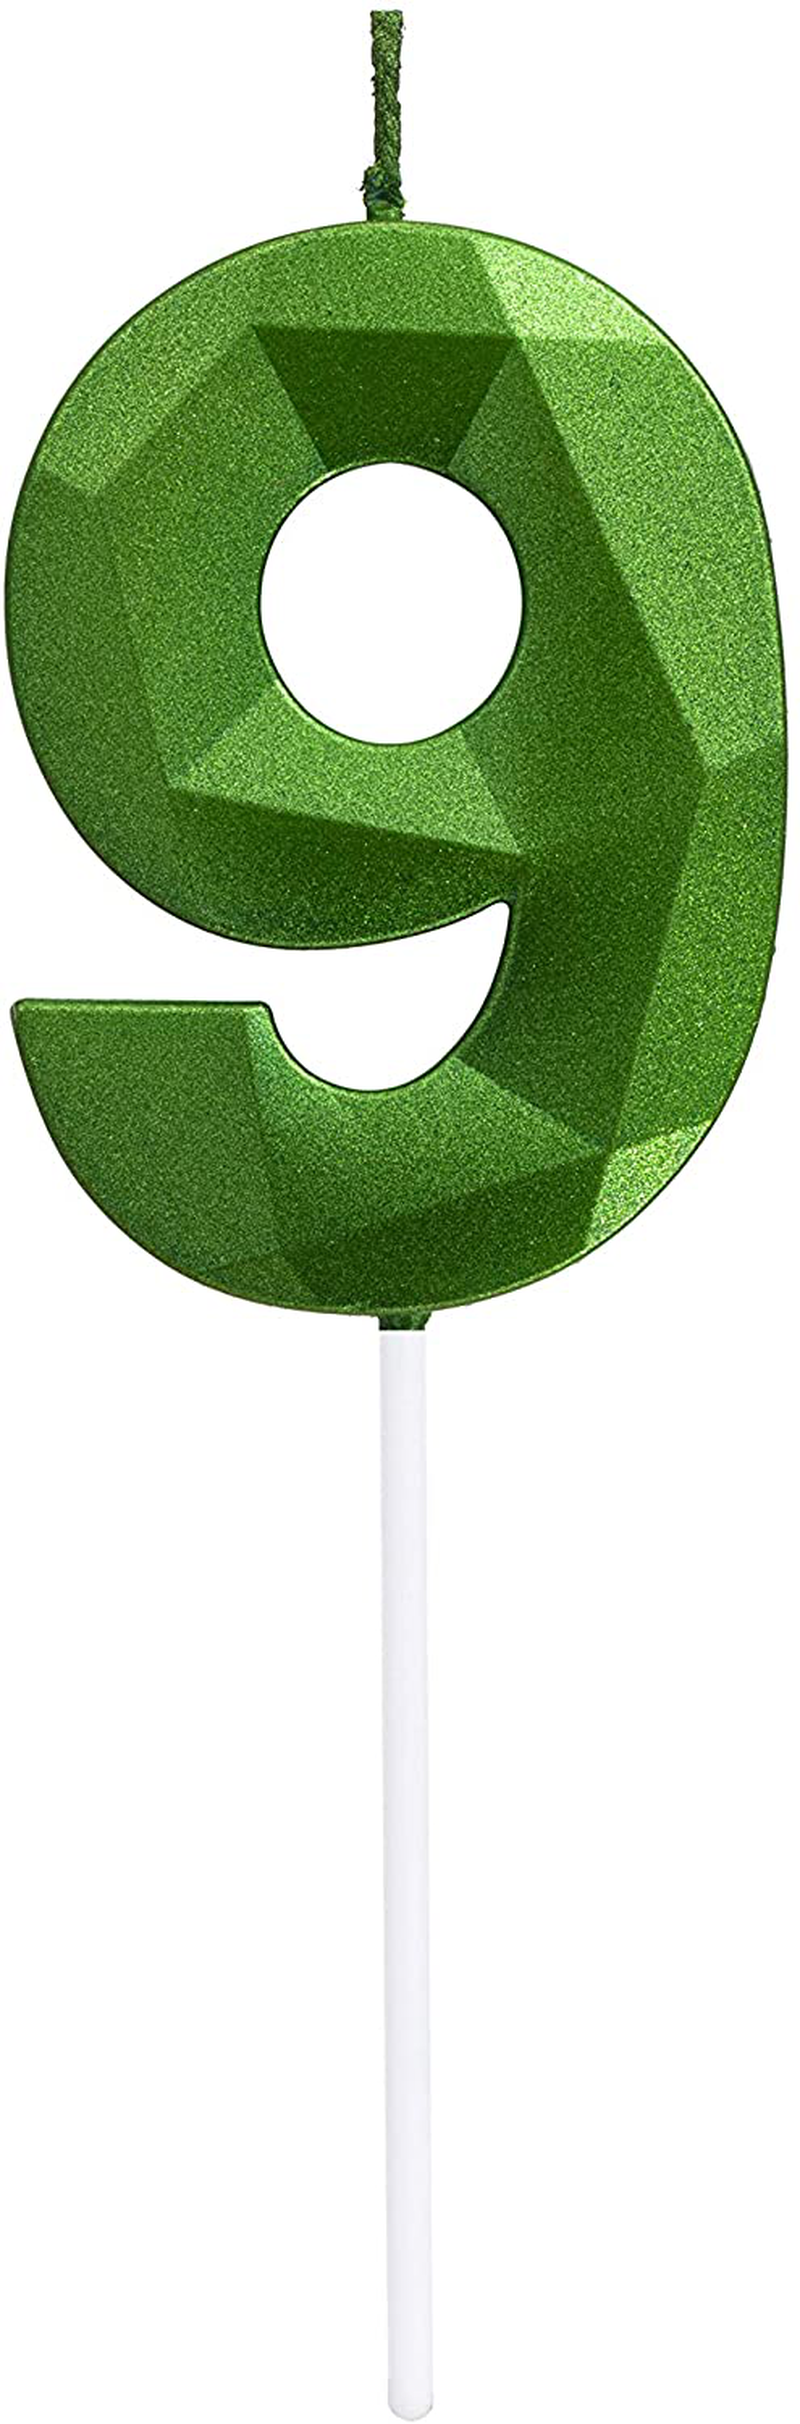 Green Happy Birthday Cake Candles,Wedding Cake Number Candles,3D Design Cake Topper Decoration for Party Kids Adults (Green Number 8)